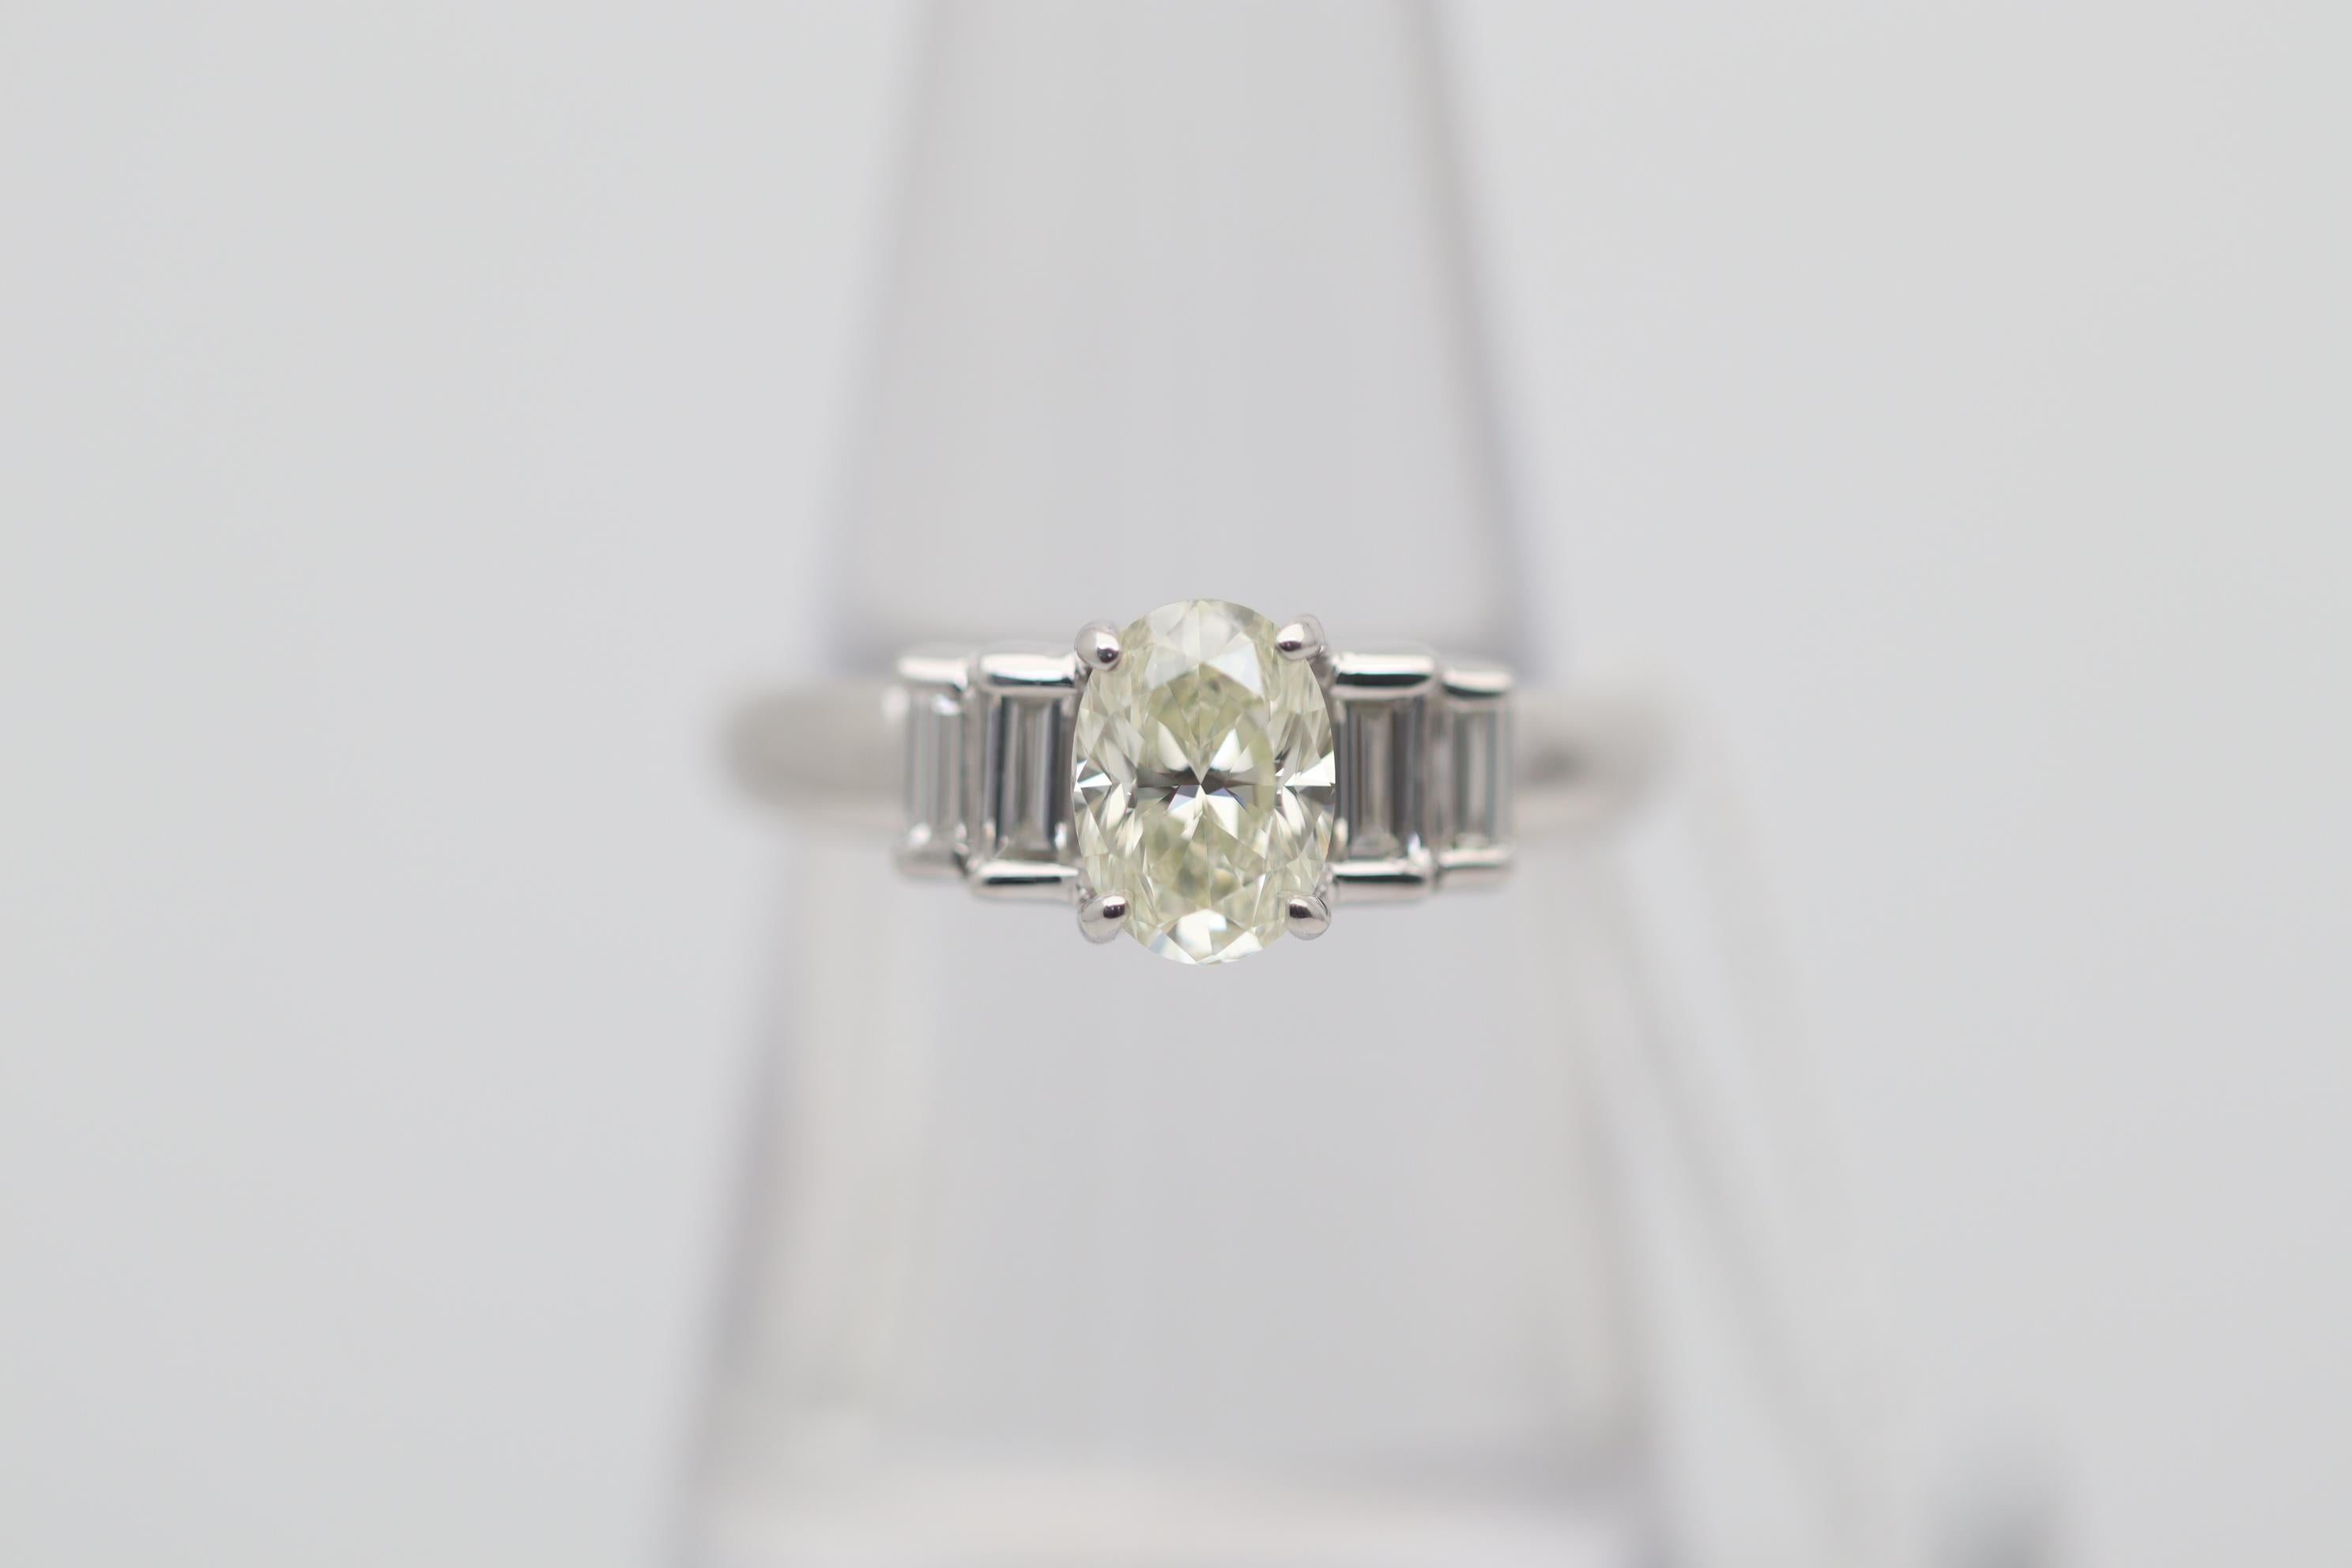 A classic and stylish engagement ring featuring a 1.04 carat oval-shape diamonds. It has a fancy very light- yellow color along with great clarity, VS2, making the stone eye clean with no visible inclusions. It is complemented by 4 baguette-cut